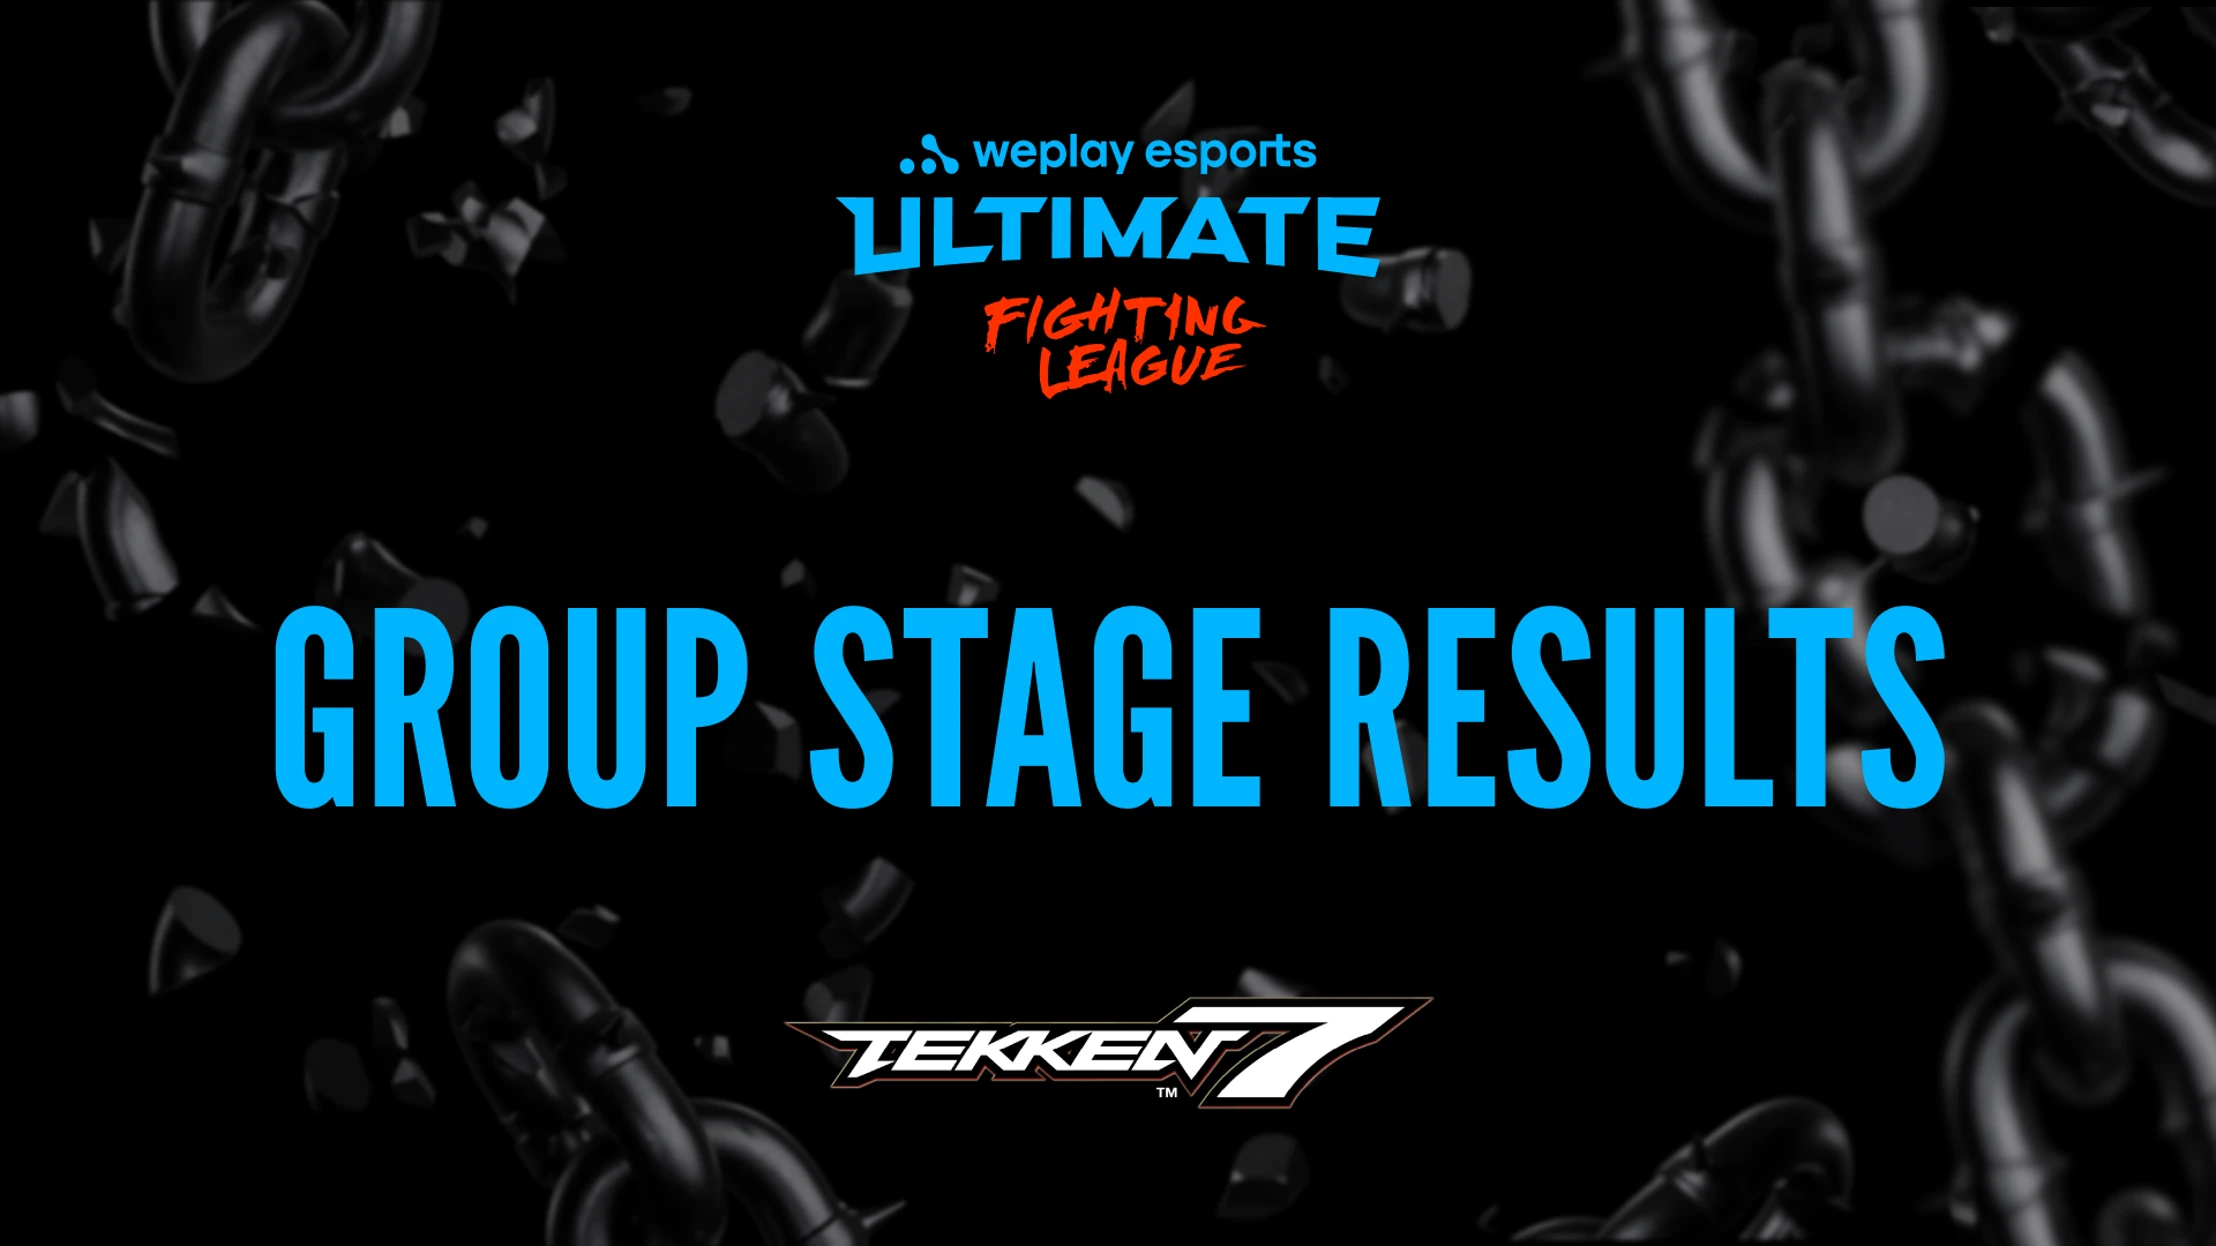 WePlay Ultimate Fighting League Tekken 7 Group Stage Results